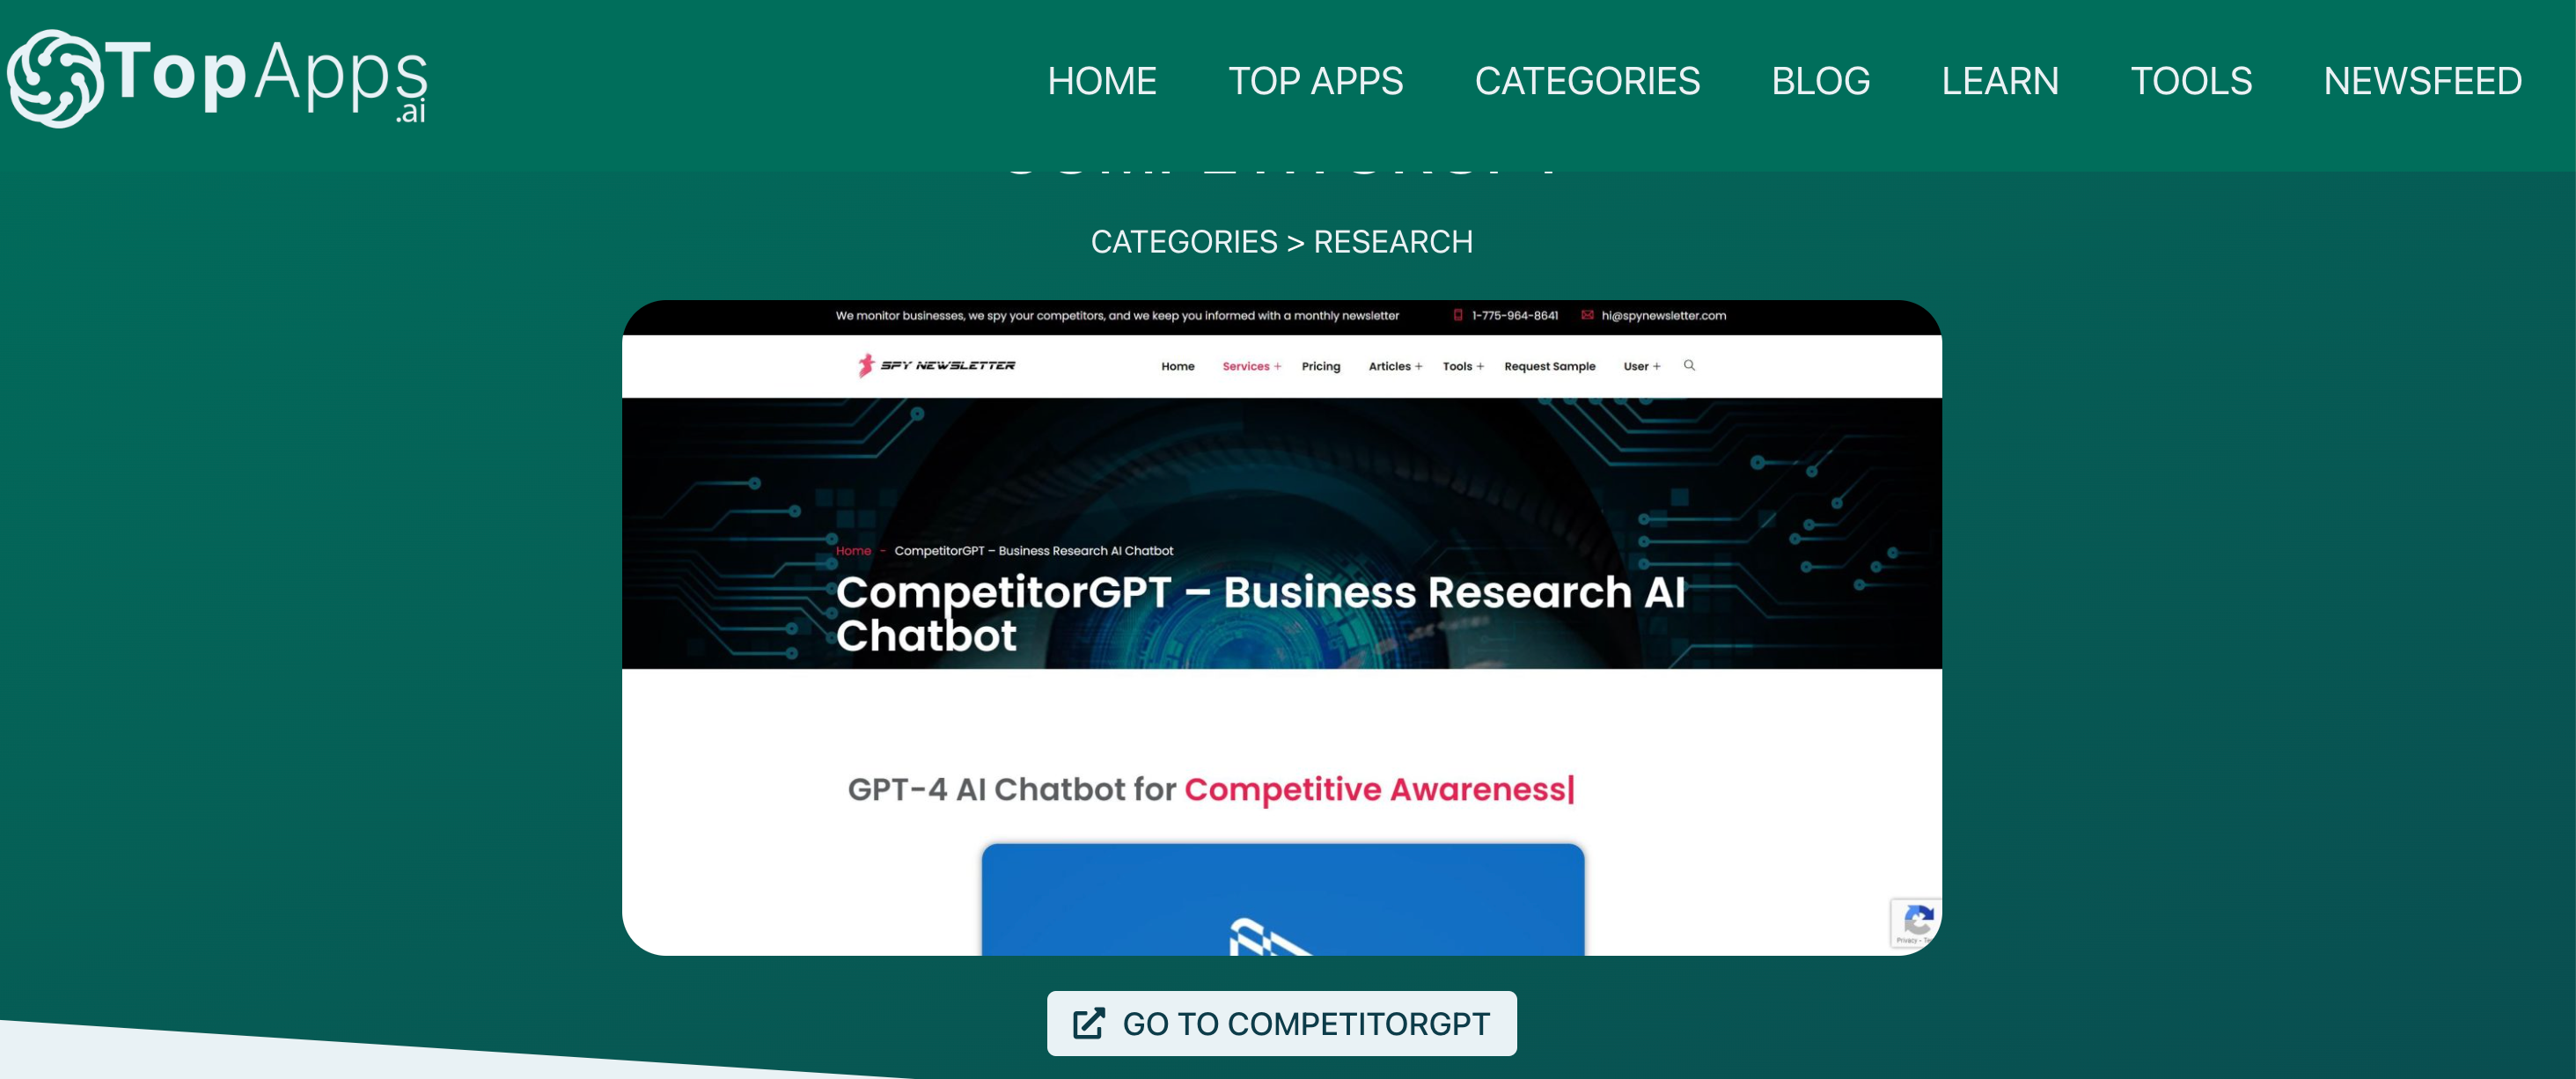 Top Apps tools for competitor analysis